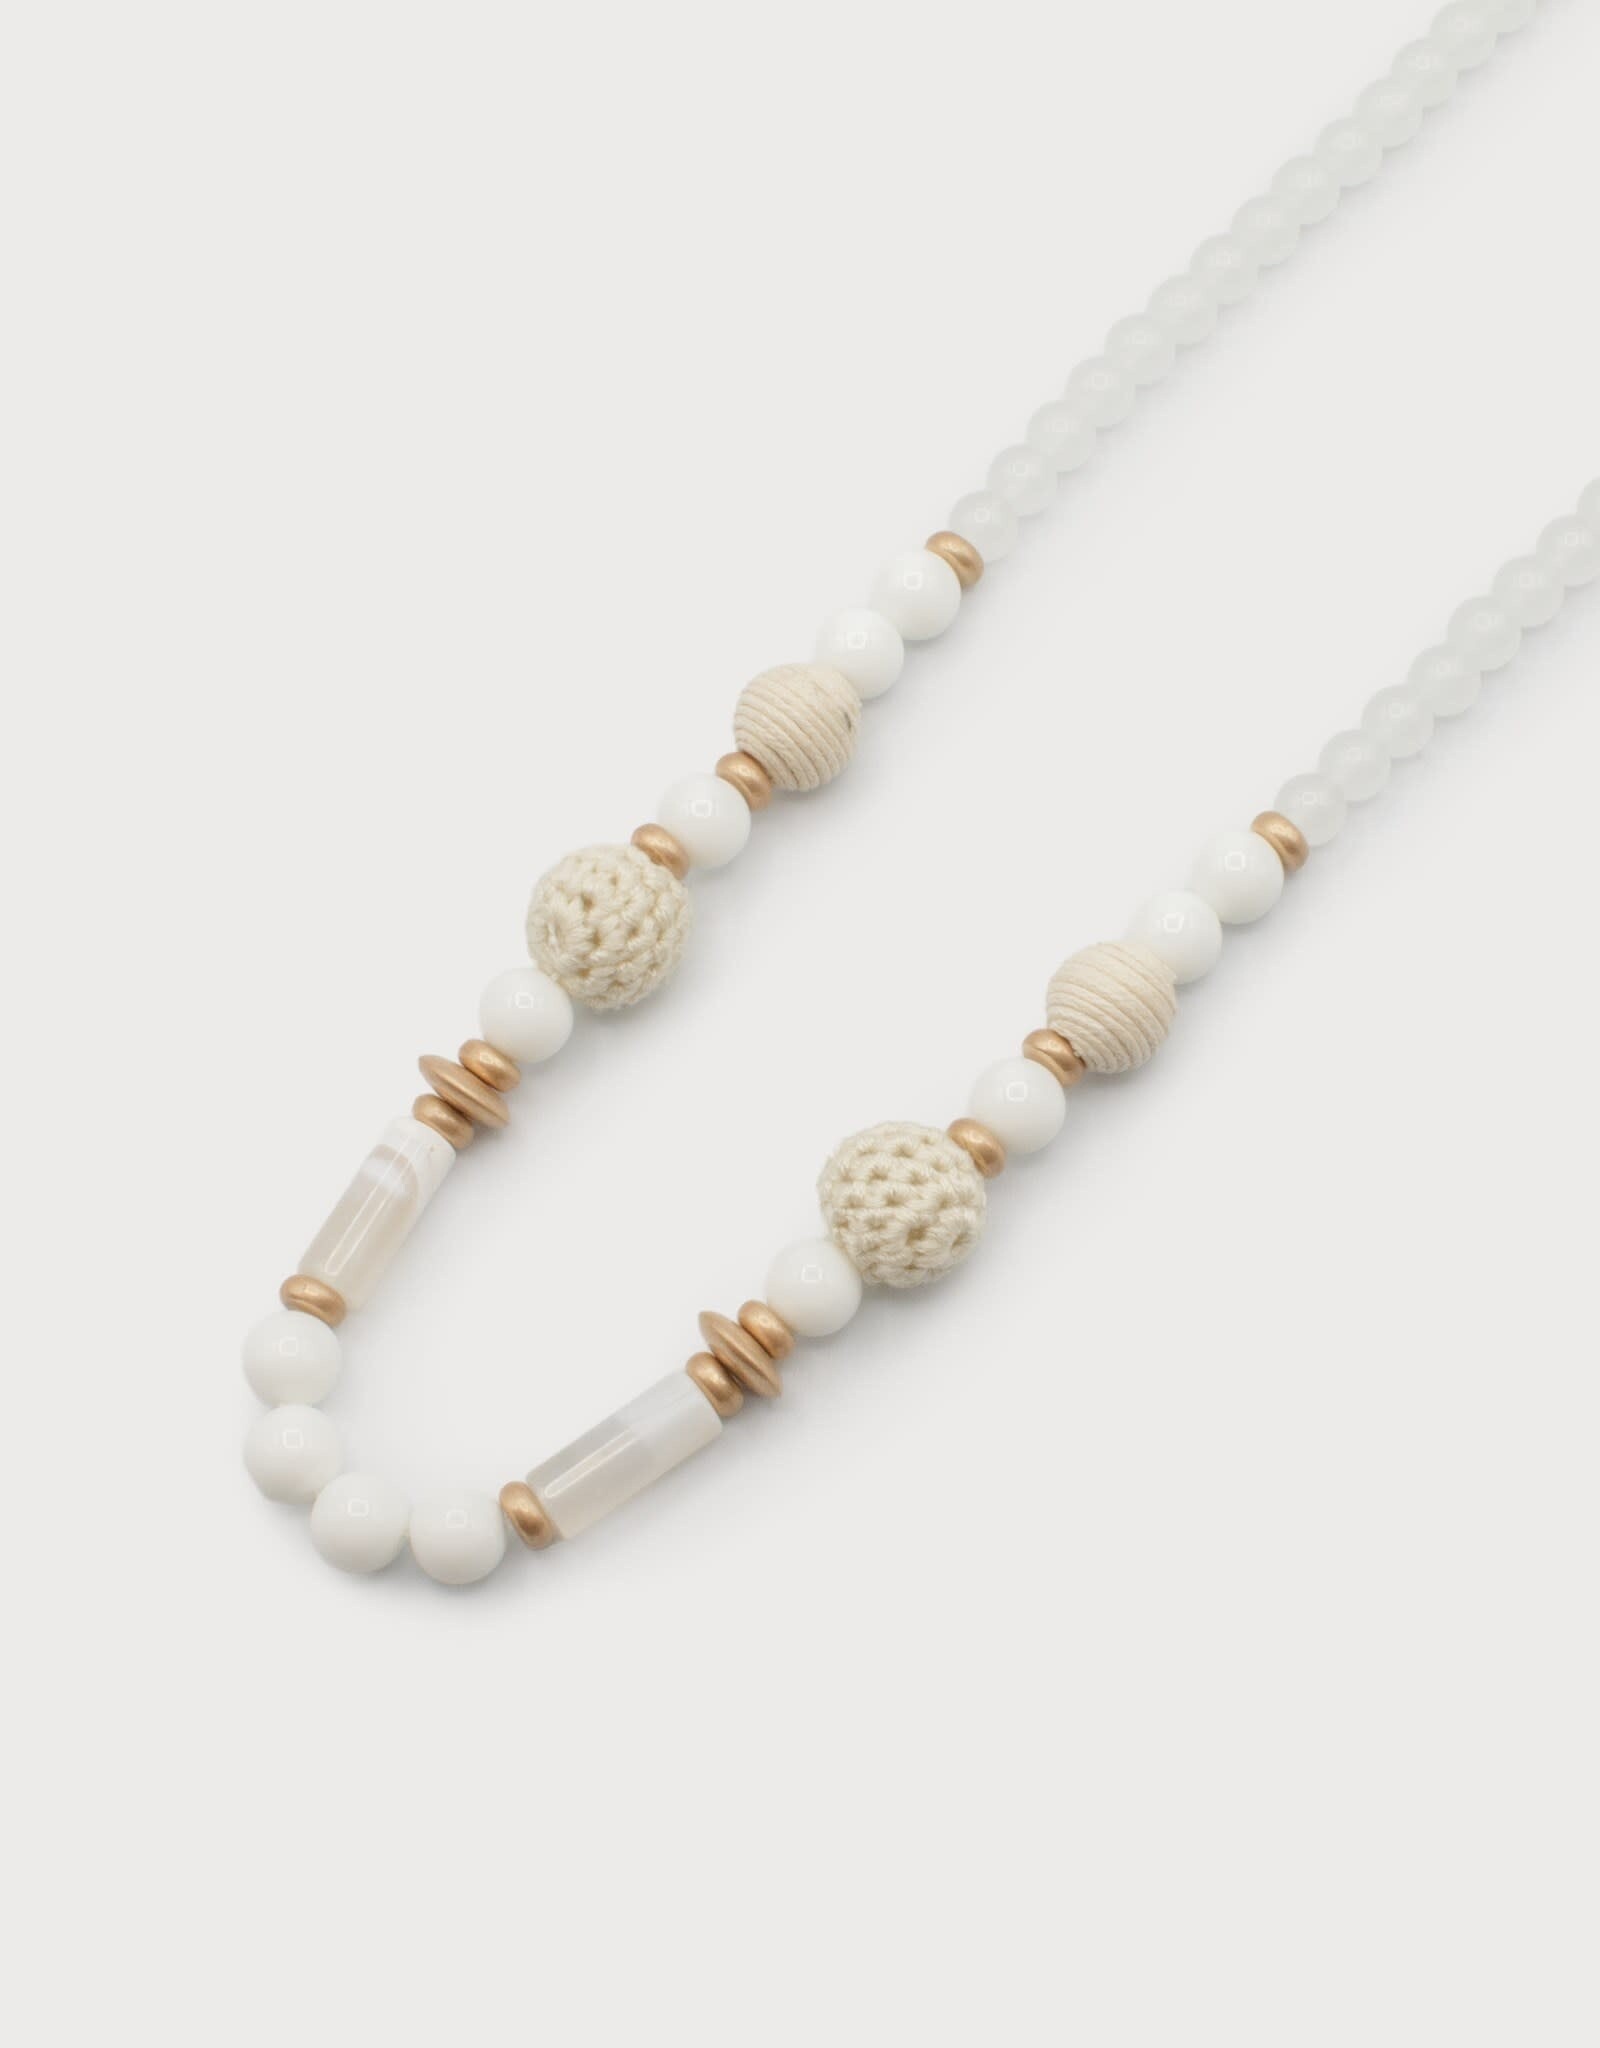 Caracol Long collier #1643 Blanc & Or